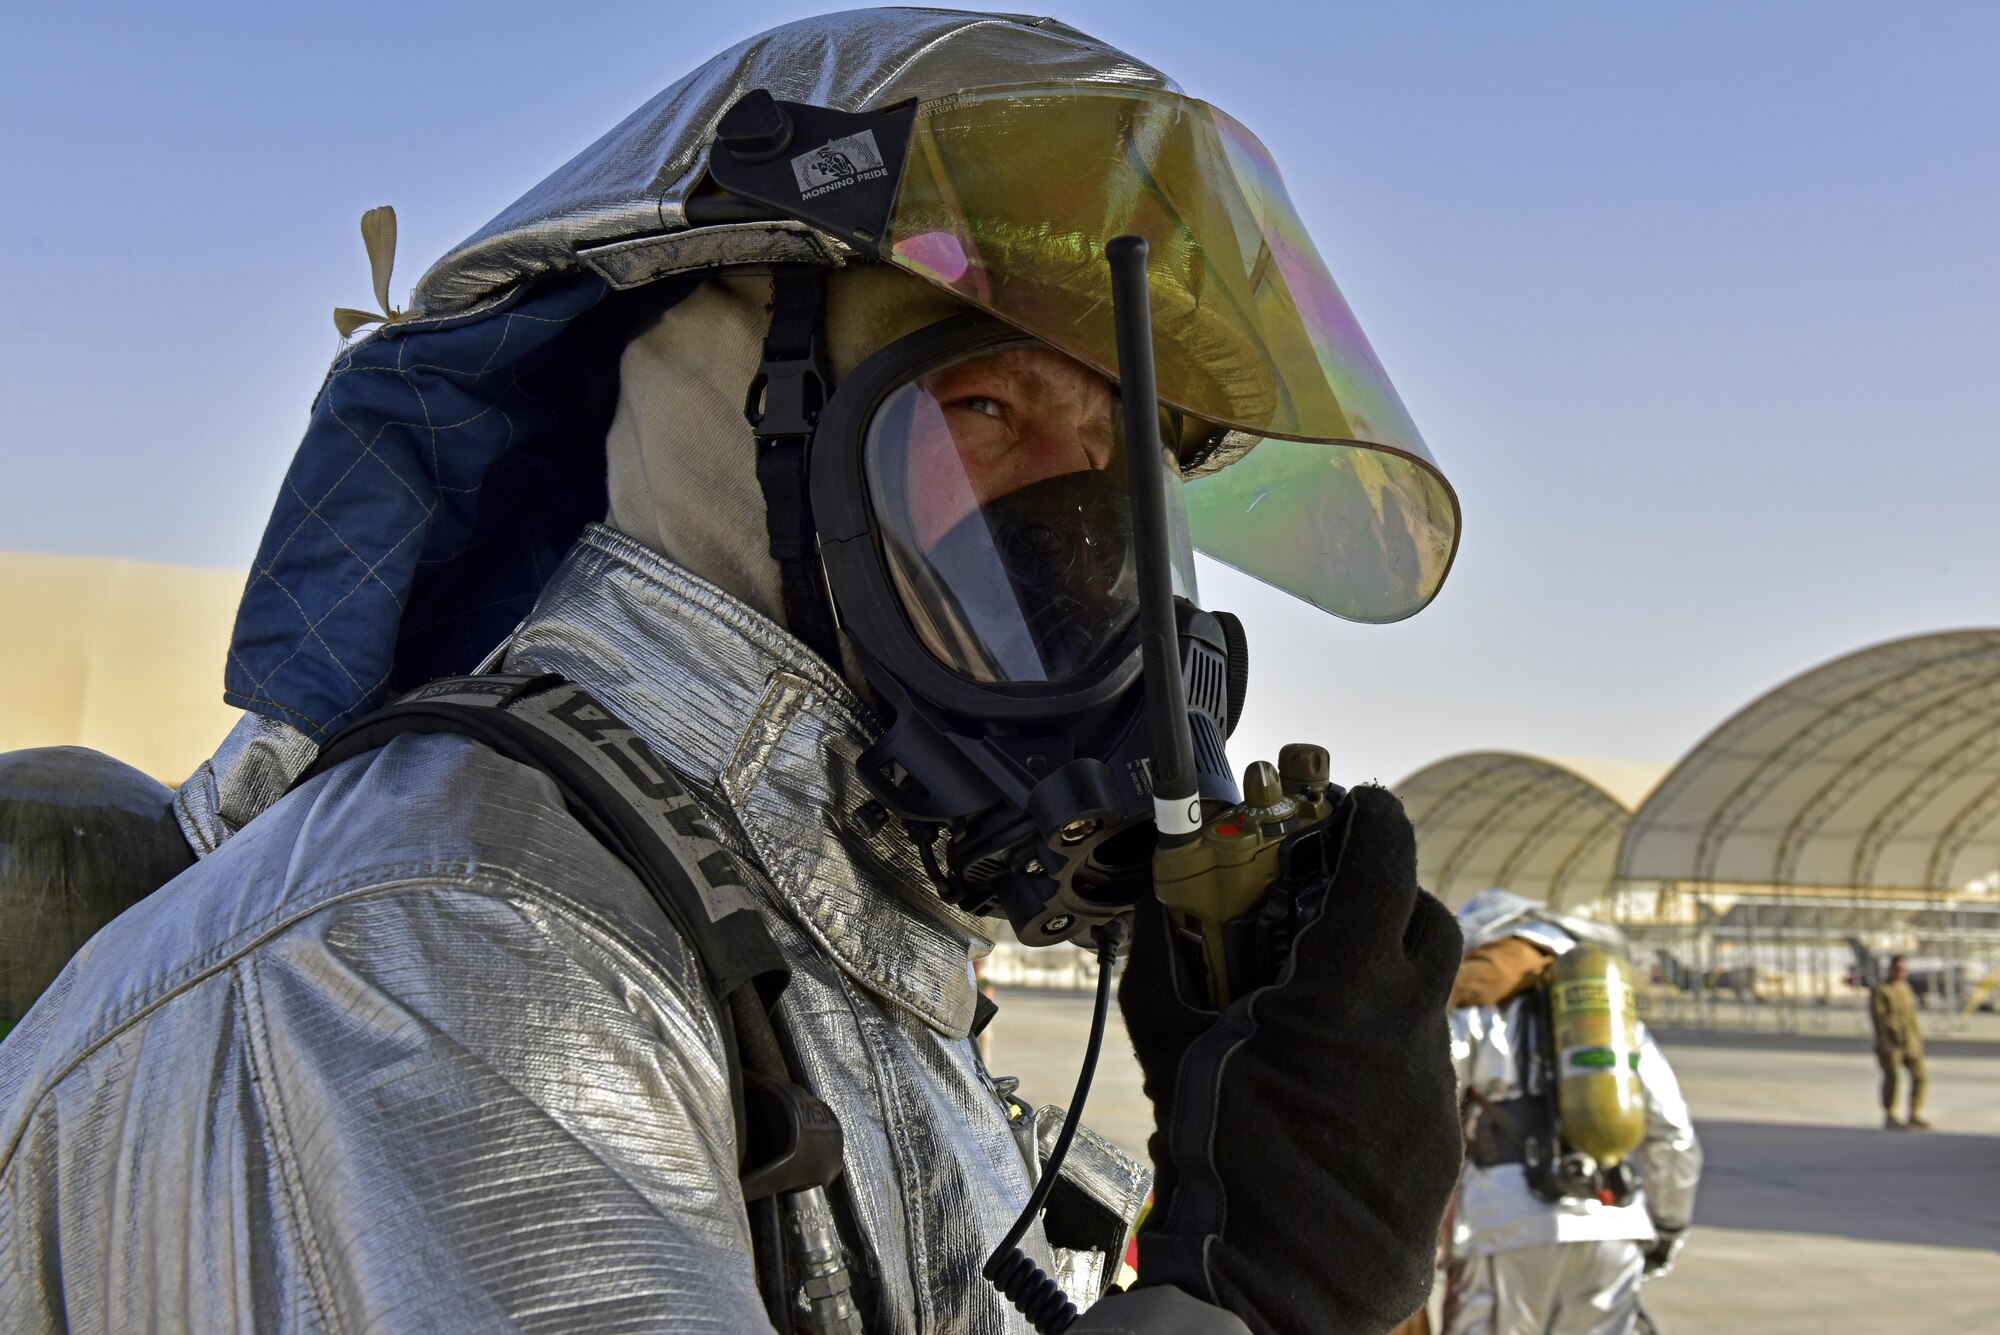 A 407th Expeditionary Civil Engineer Squadron fire department member communicates with the on scene commander during a joint coalition exercise with U.S. Air Force  and Italian Air Force July 2, 2017, at the 407th Air Expeditionary Group in Southwest Asia. The exercise was a constructed as an in flight emergency, which the first responders task was to respond to a simulated malfunctioned aircraft, secure the area, determine safe for entry and then recover injured aircrew. (U.S. Air Force photo by Senior Airman Ramon A. Adelan)